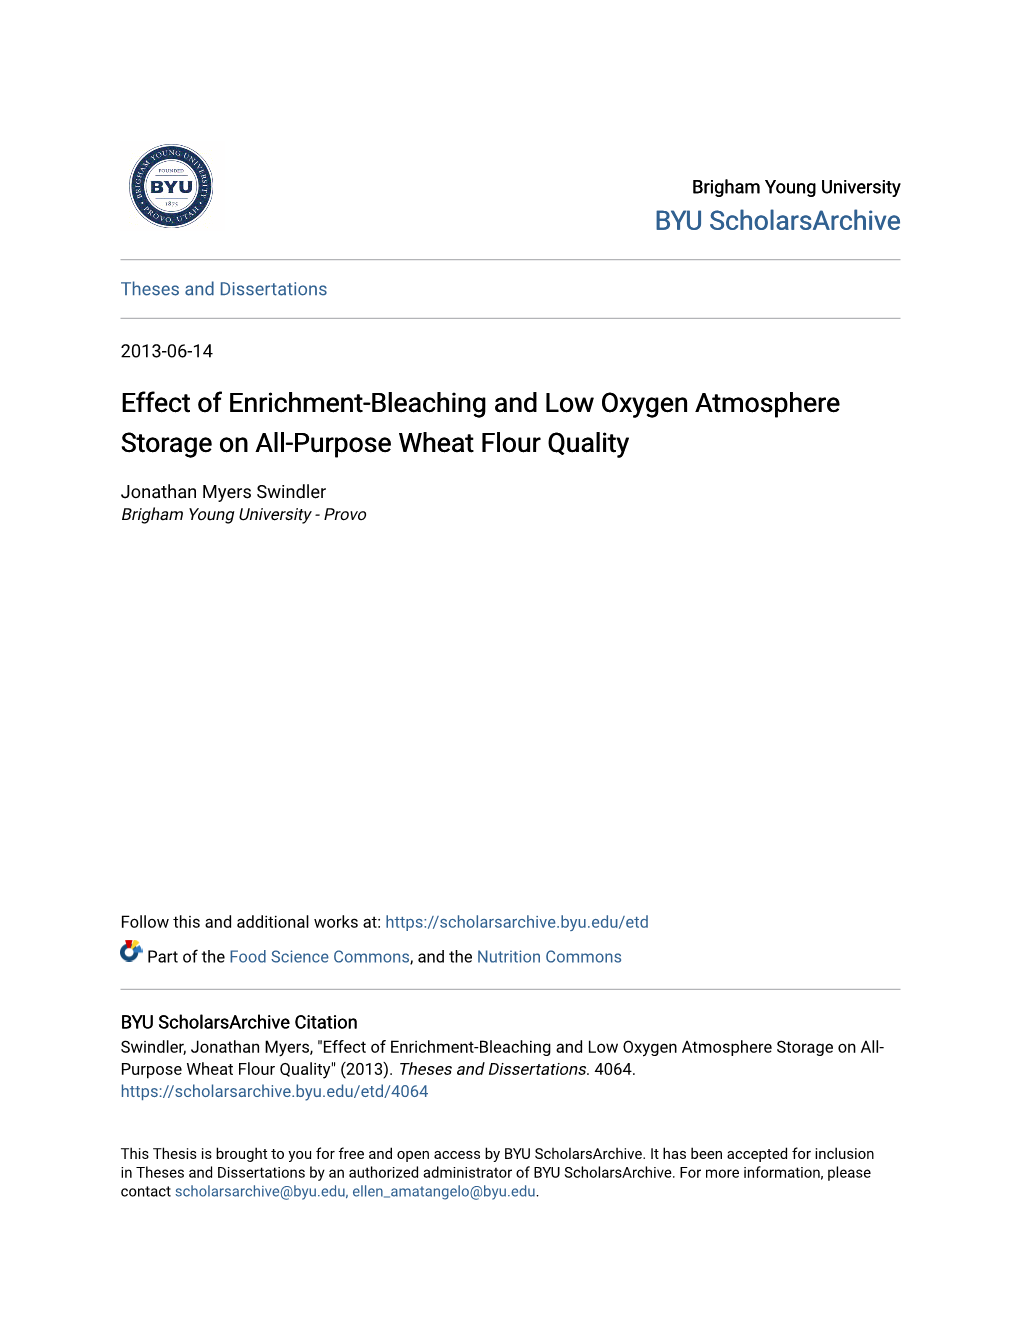 Effect of Enrichment-Bleaching and Low Oxygen Atmosphere Storage on All-Purpose Wheat Flour Quality